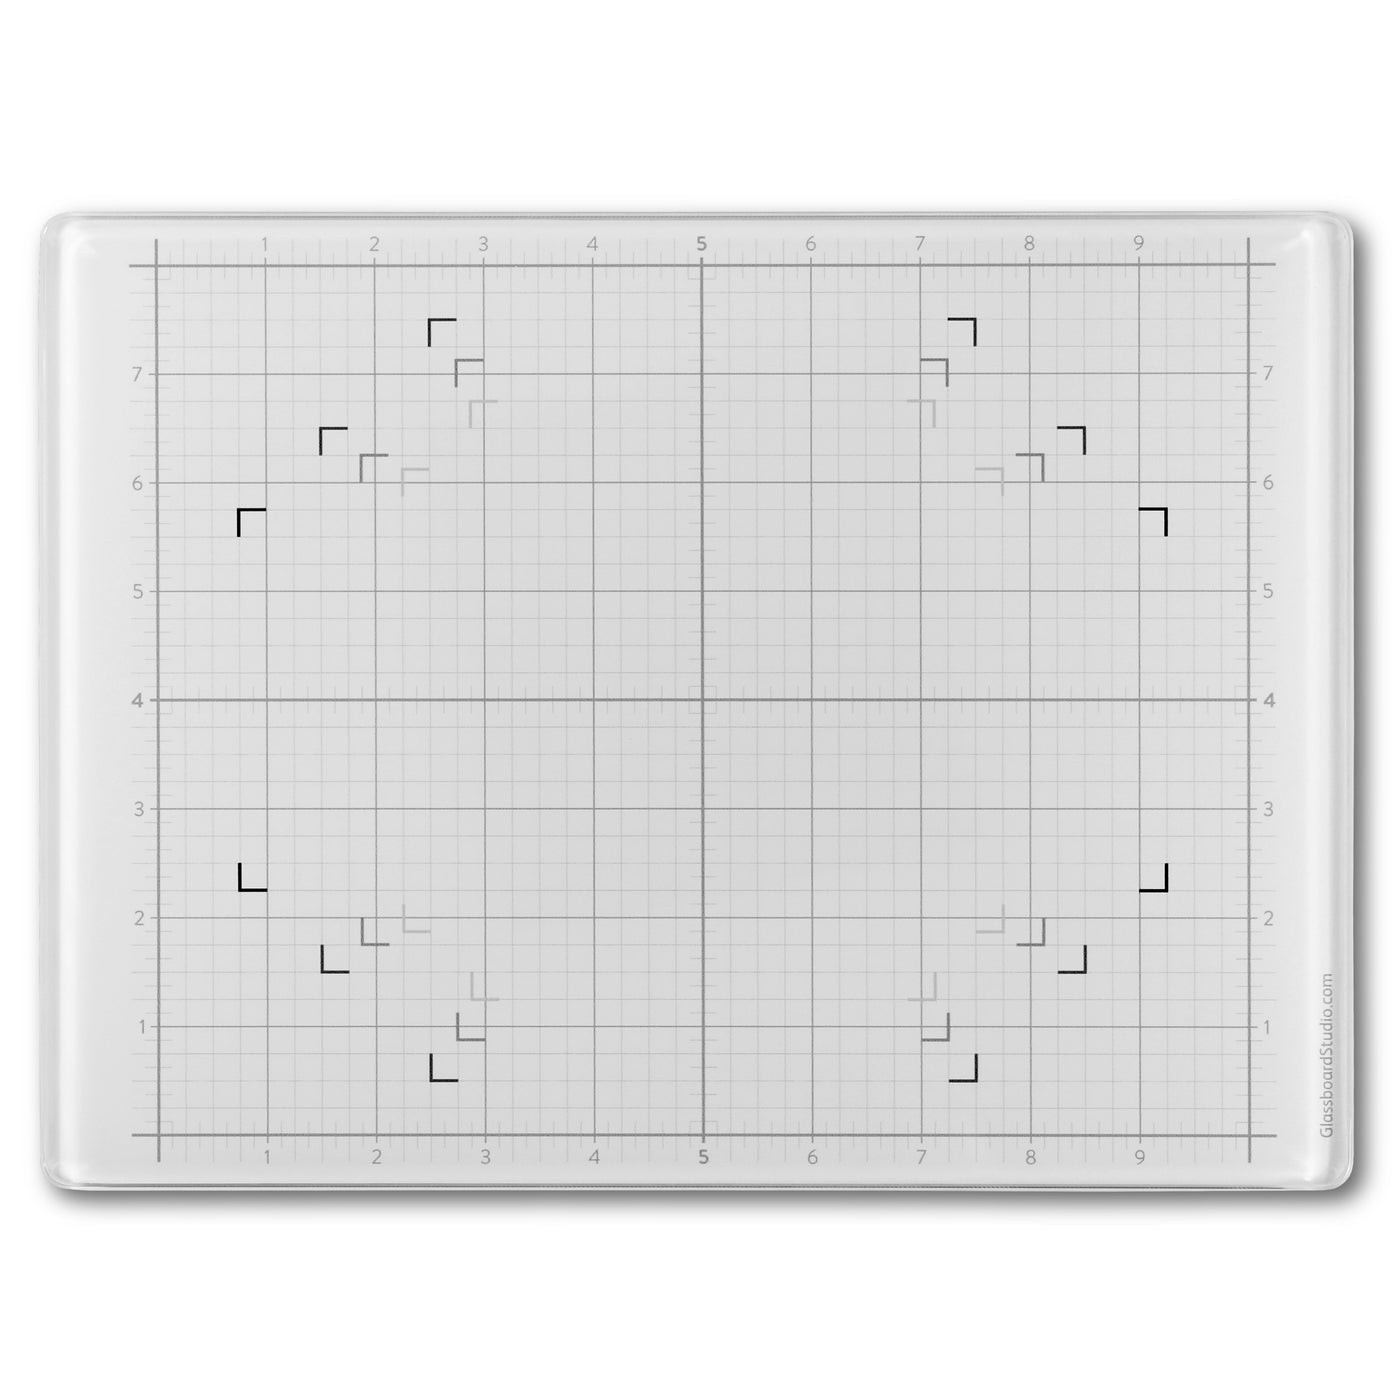 GLASSBOARD STUDIO True White Glass Craft Mat (9x12in) - Magnetic, Heat &  Scratch Resistant, Stain-Proof for Crafting, Cutting, Painting, Mixed Media  Artwork - Grid & Angle Lines, Non-Slip Feet : : Home